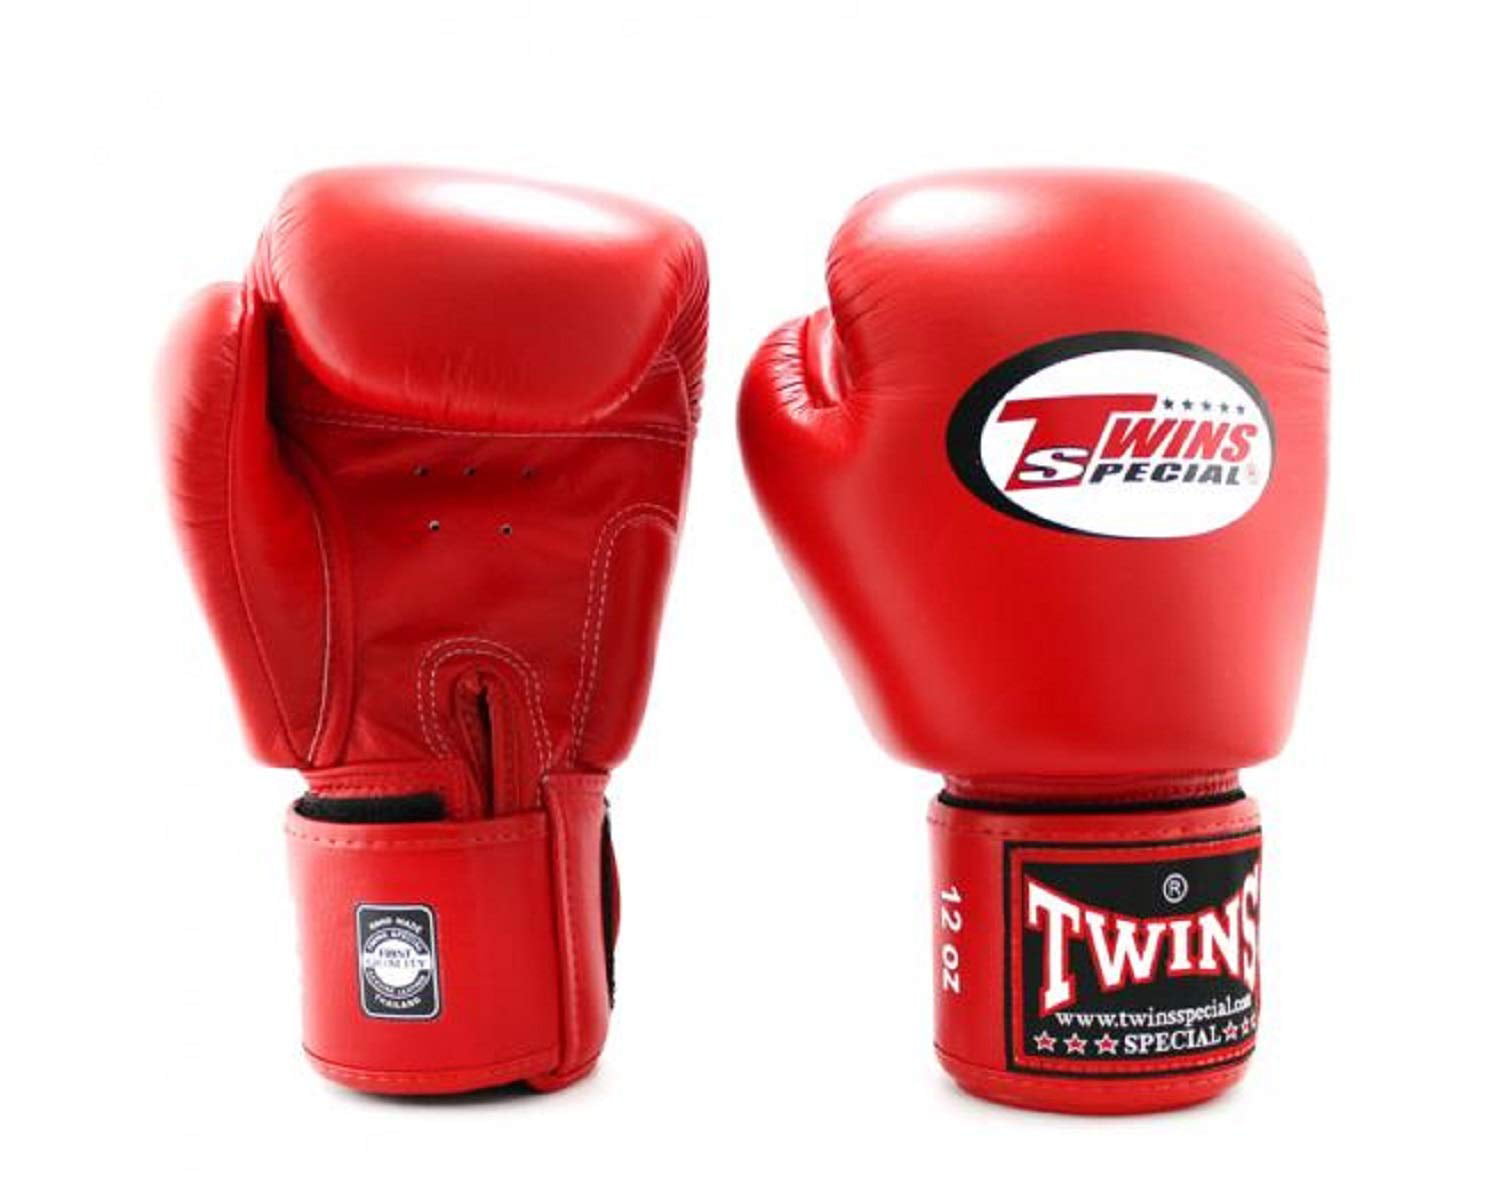 Twins Special BGVL-3 Vectro Strap Fight MMA Martial Arts Muay Thai Boxing Gloves 